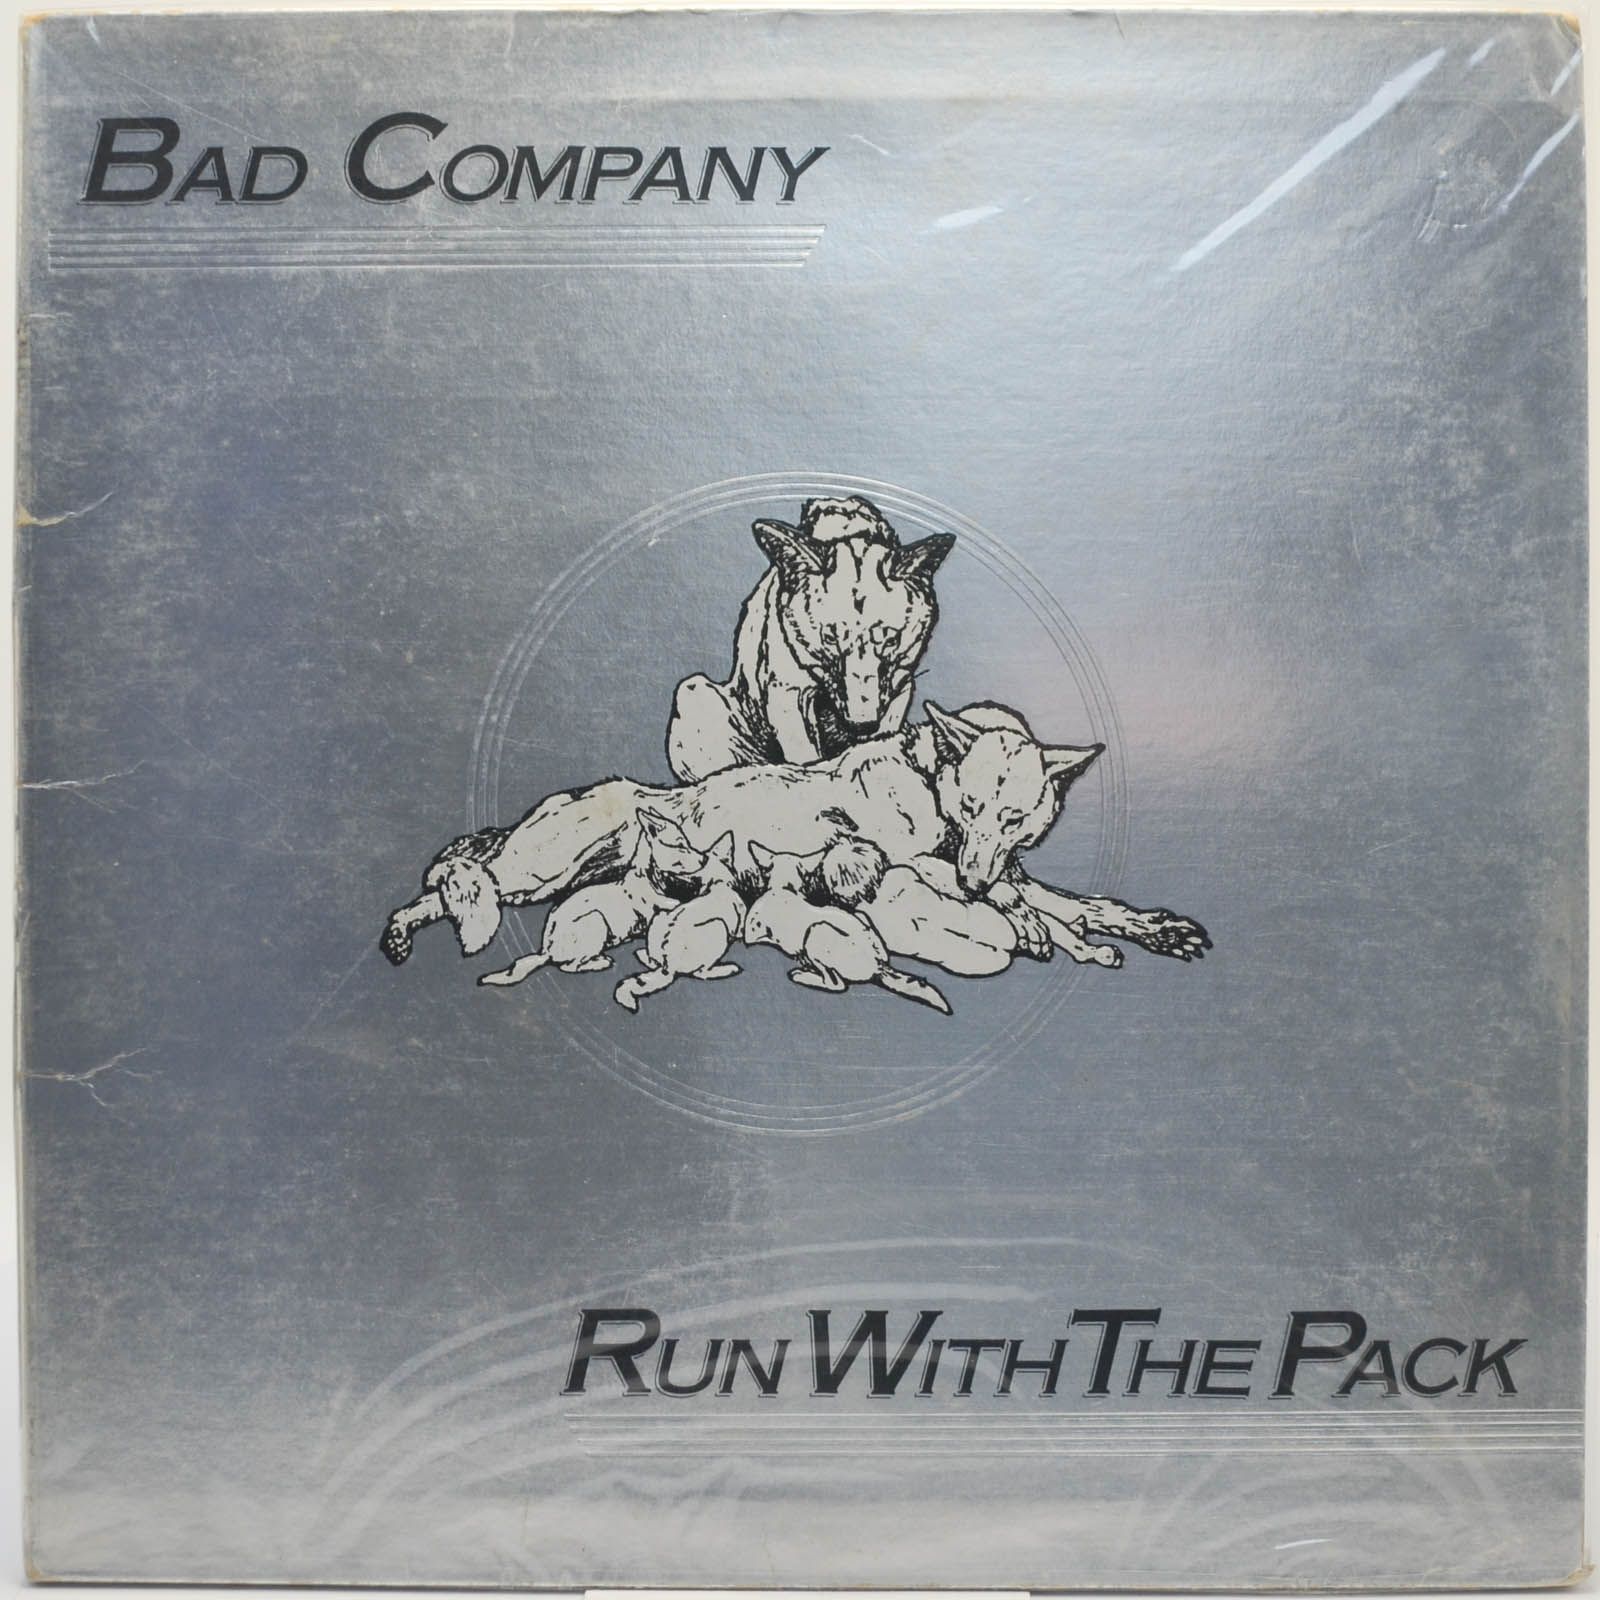 Bad Company — Run With The Pack (1-st, UK), 1976